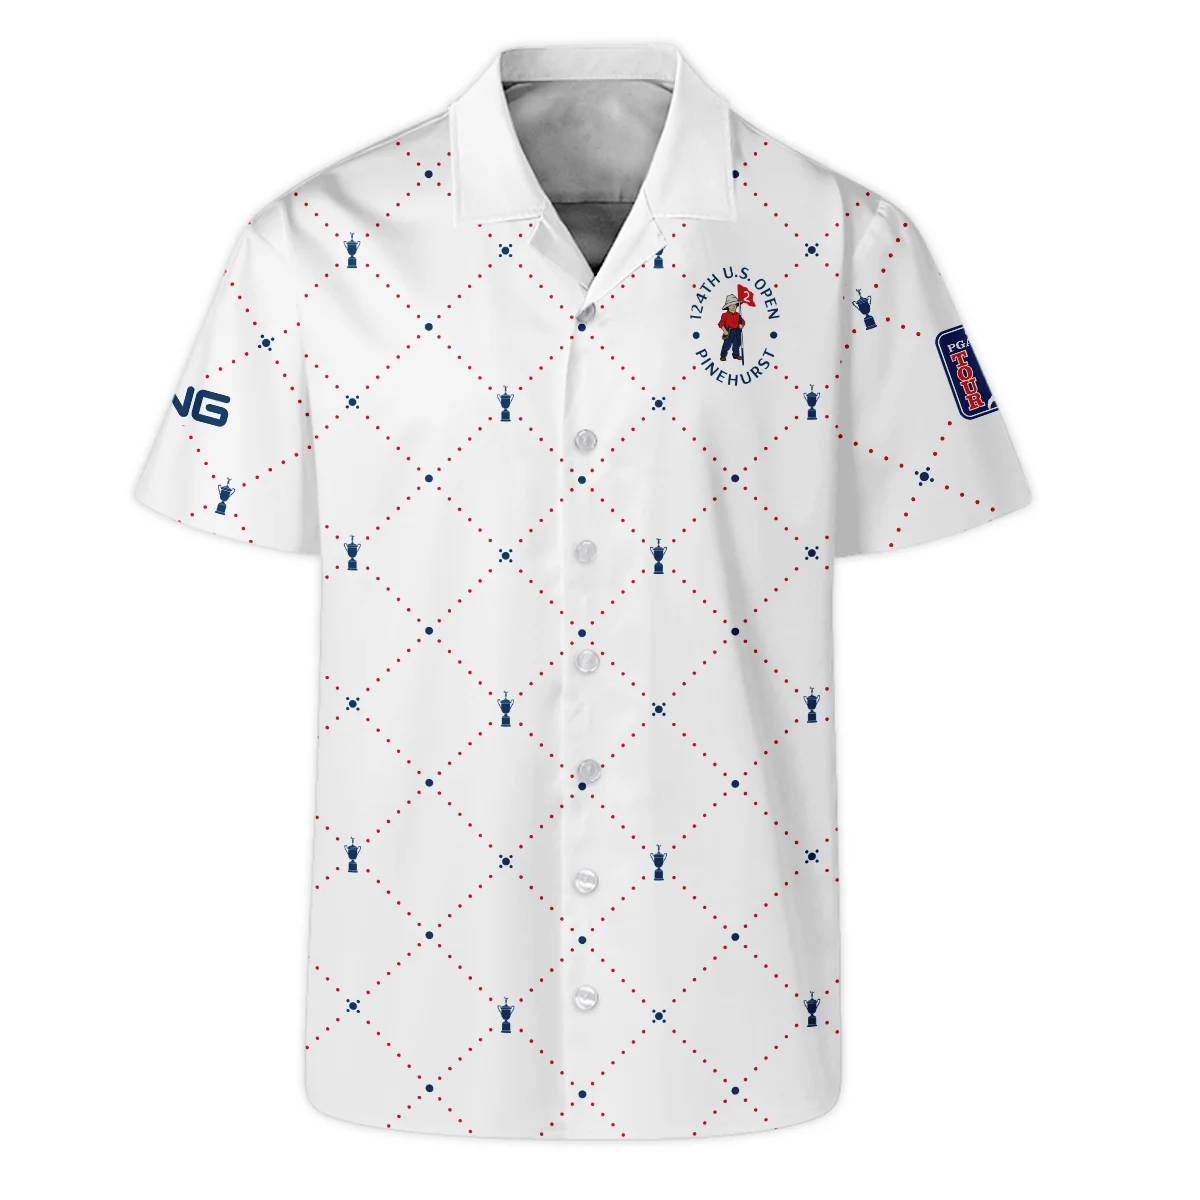 Argyle Pattern With Cup 124th U.S. Open Pinehurst Ping Hoodie Shirt Style Classic Hoodie Shirt